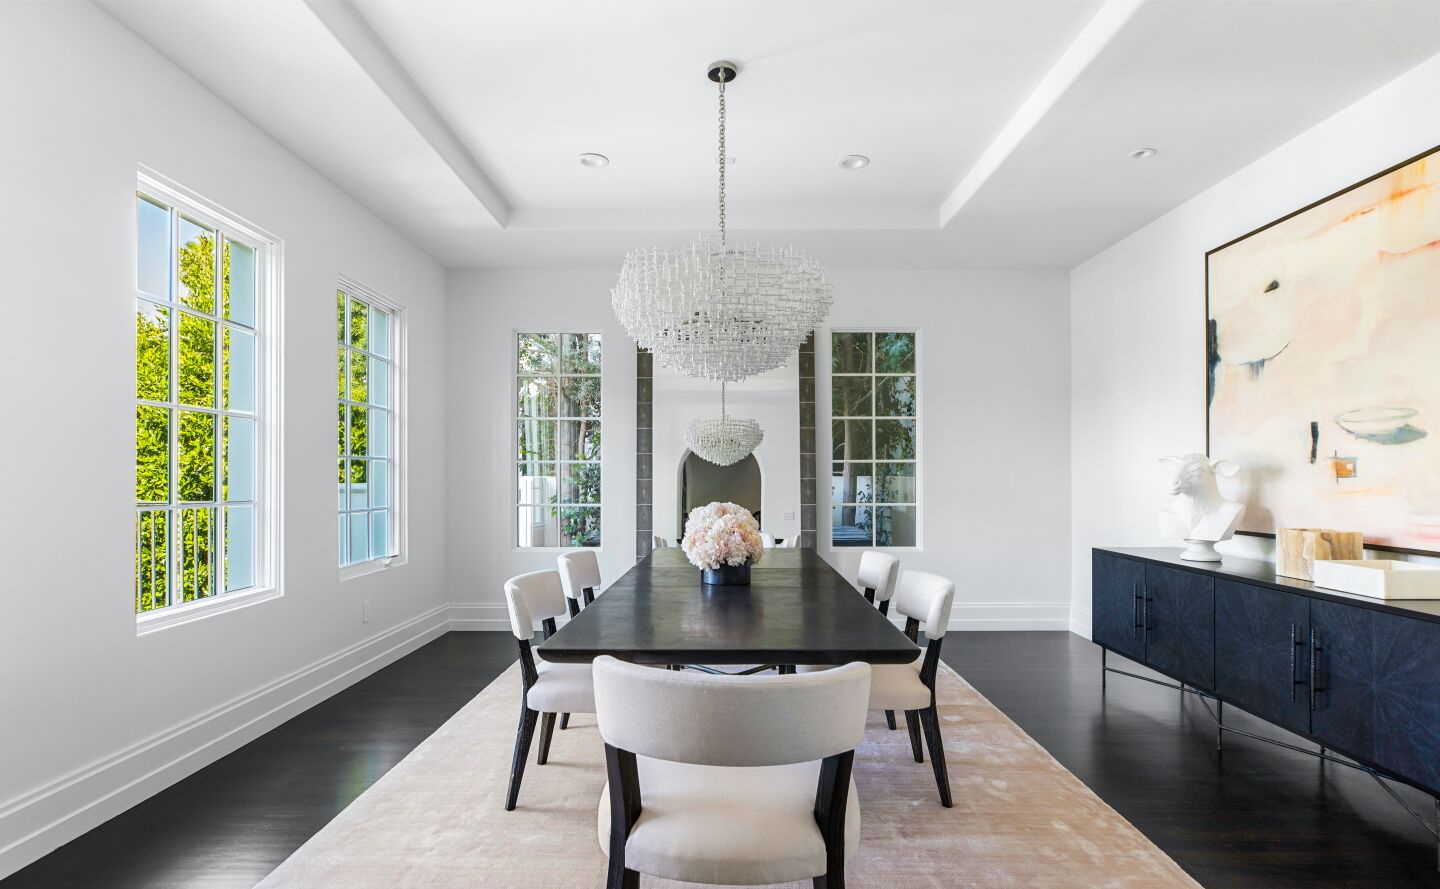 White walled dining room with dining furniture, art, dark wood floors and windows overlooking greenery.